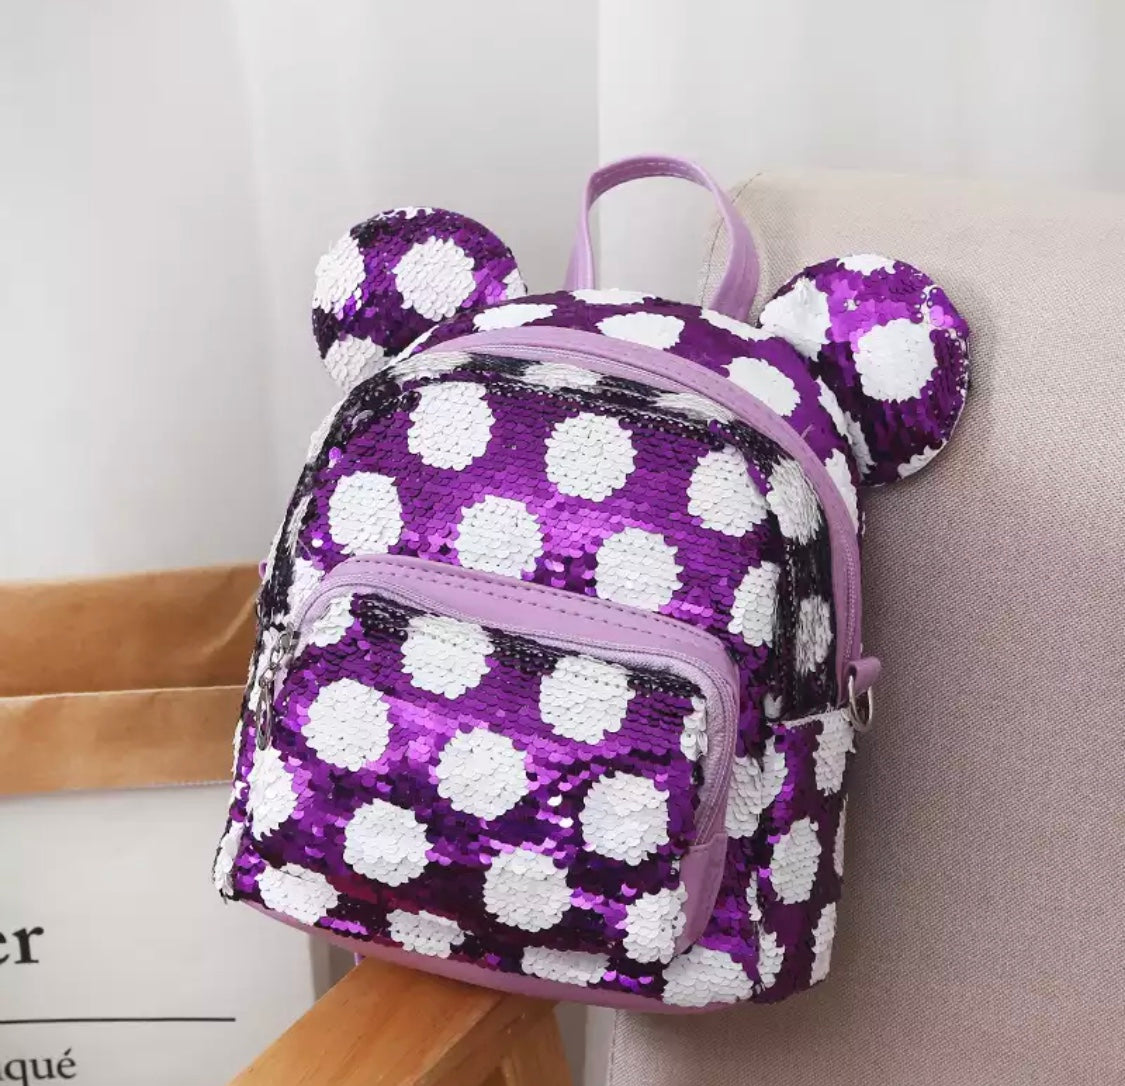 DDLGVERSE Mini Sequin Mouse Backpack Purple With White Spots